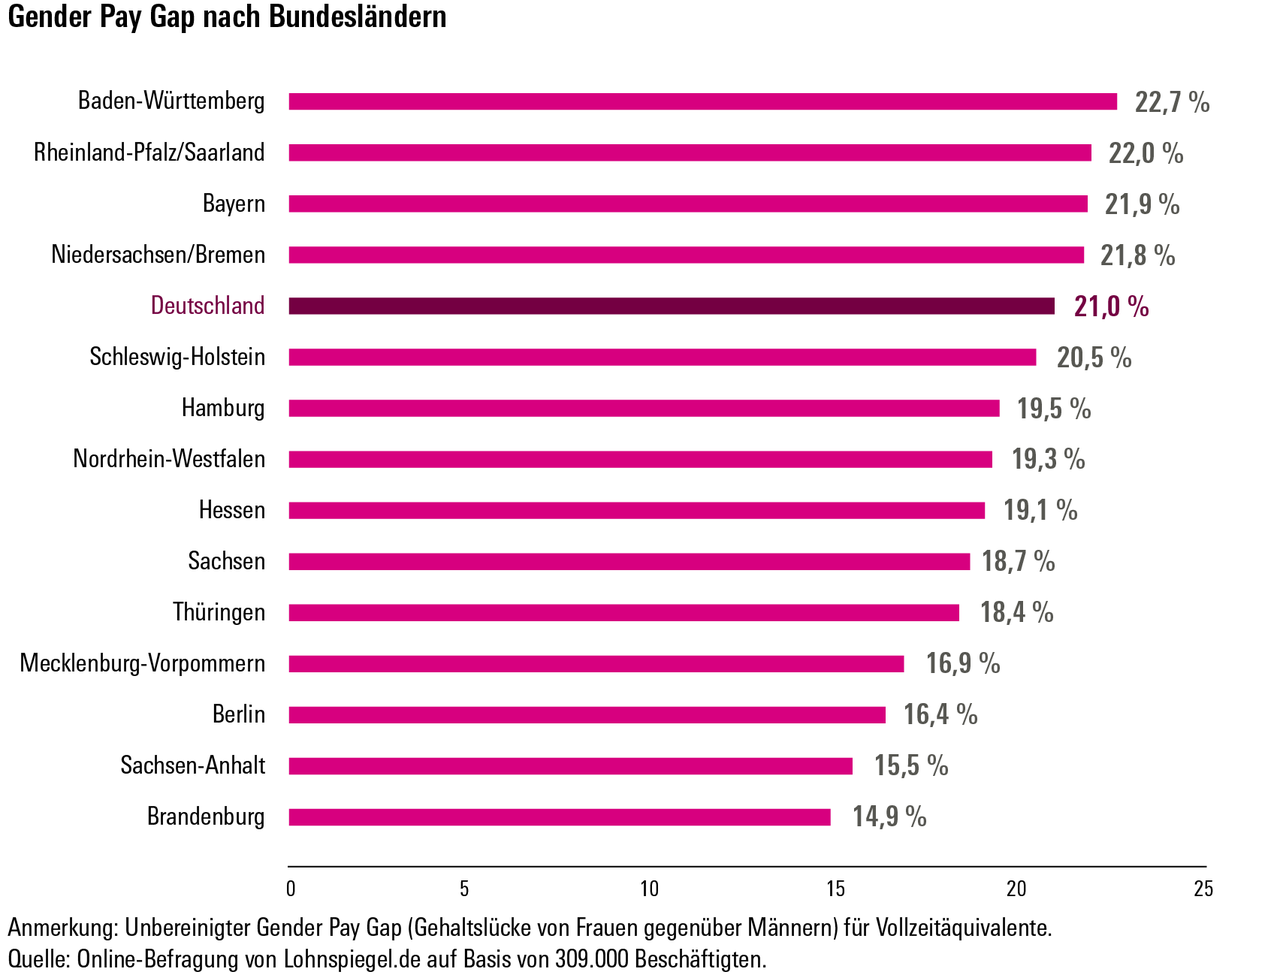 Bar graph of the gender pay gap by federal state in Germany (2019)